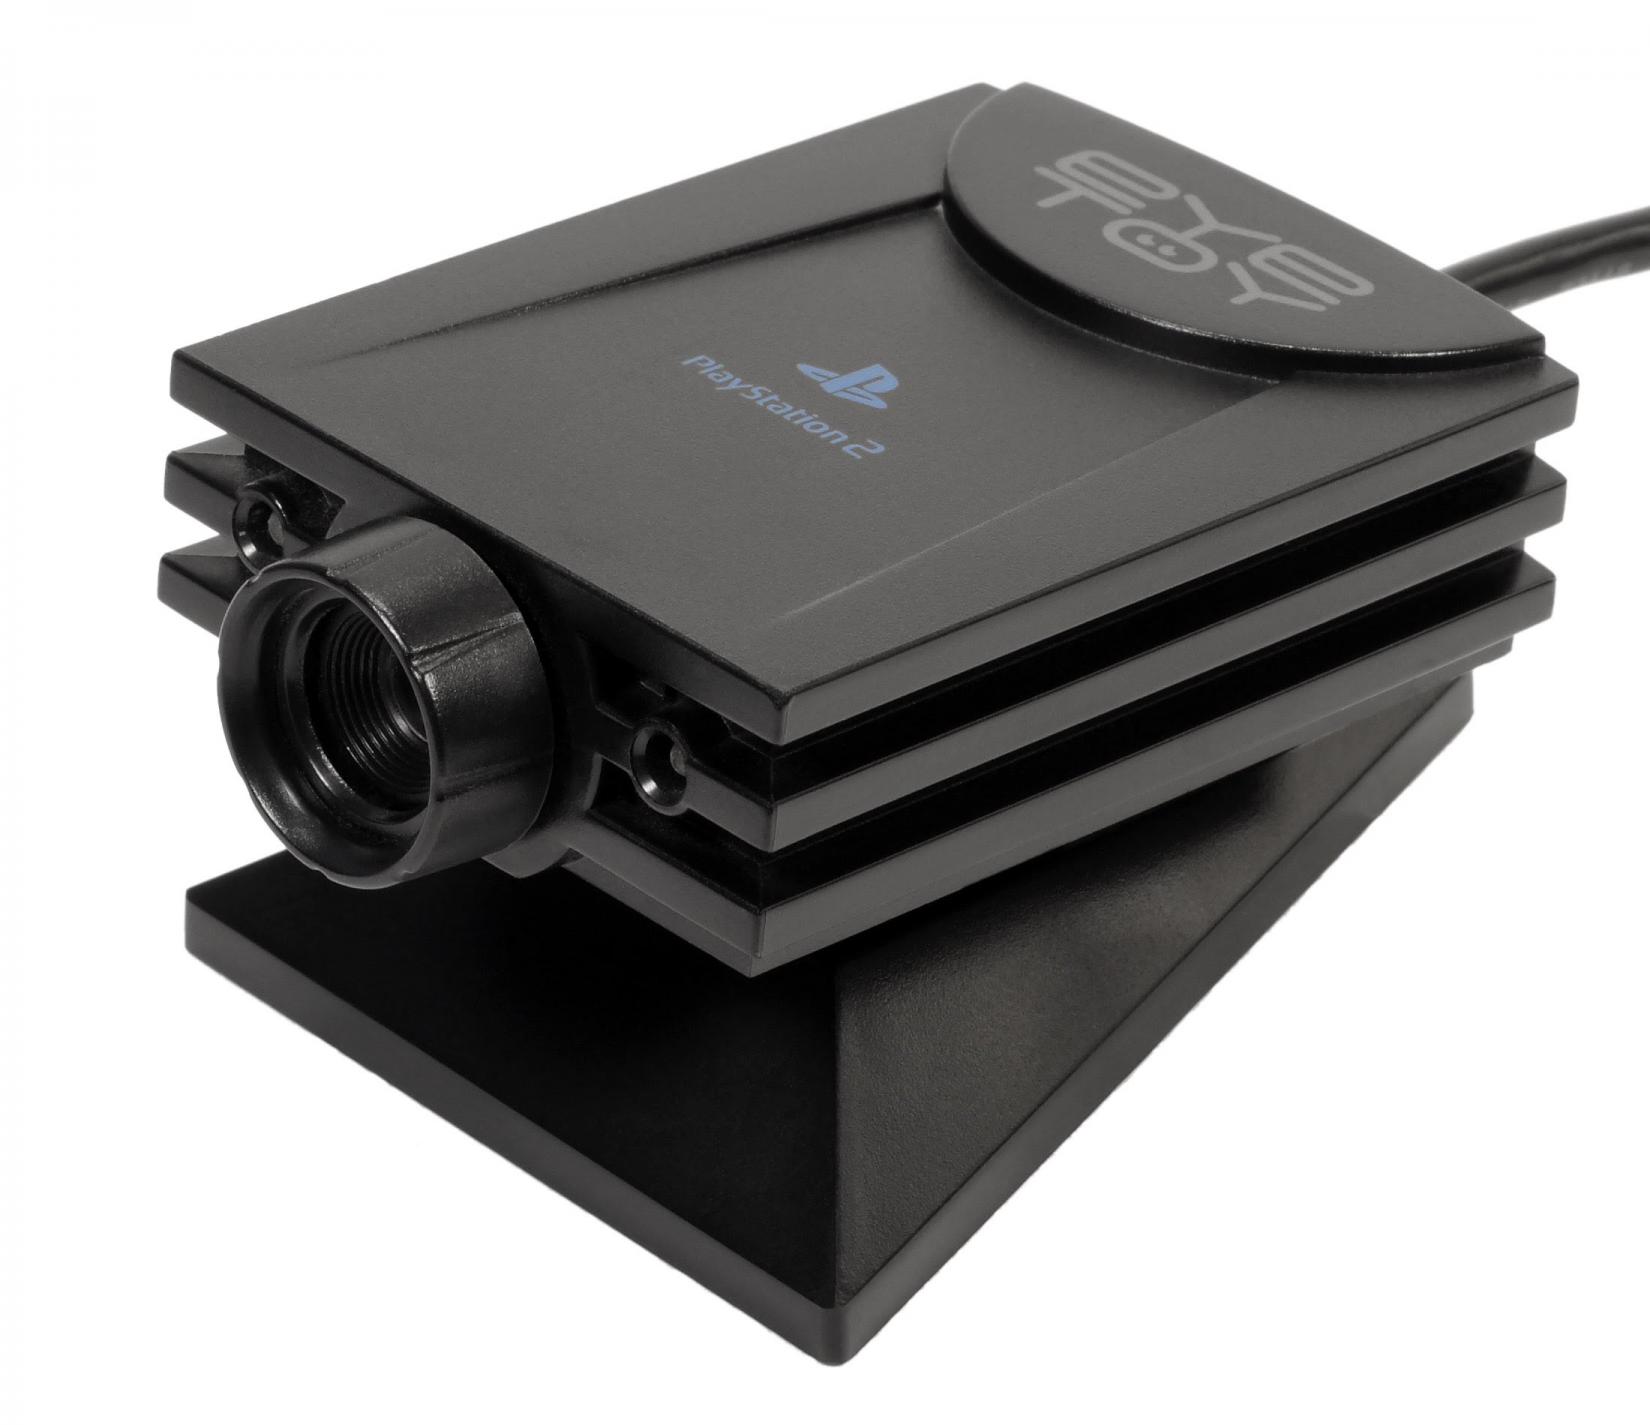 How To Install The Playstation 2 EyeToy as a Webcam